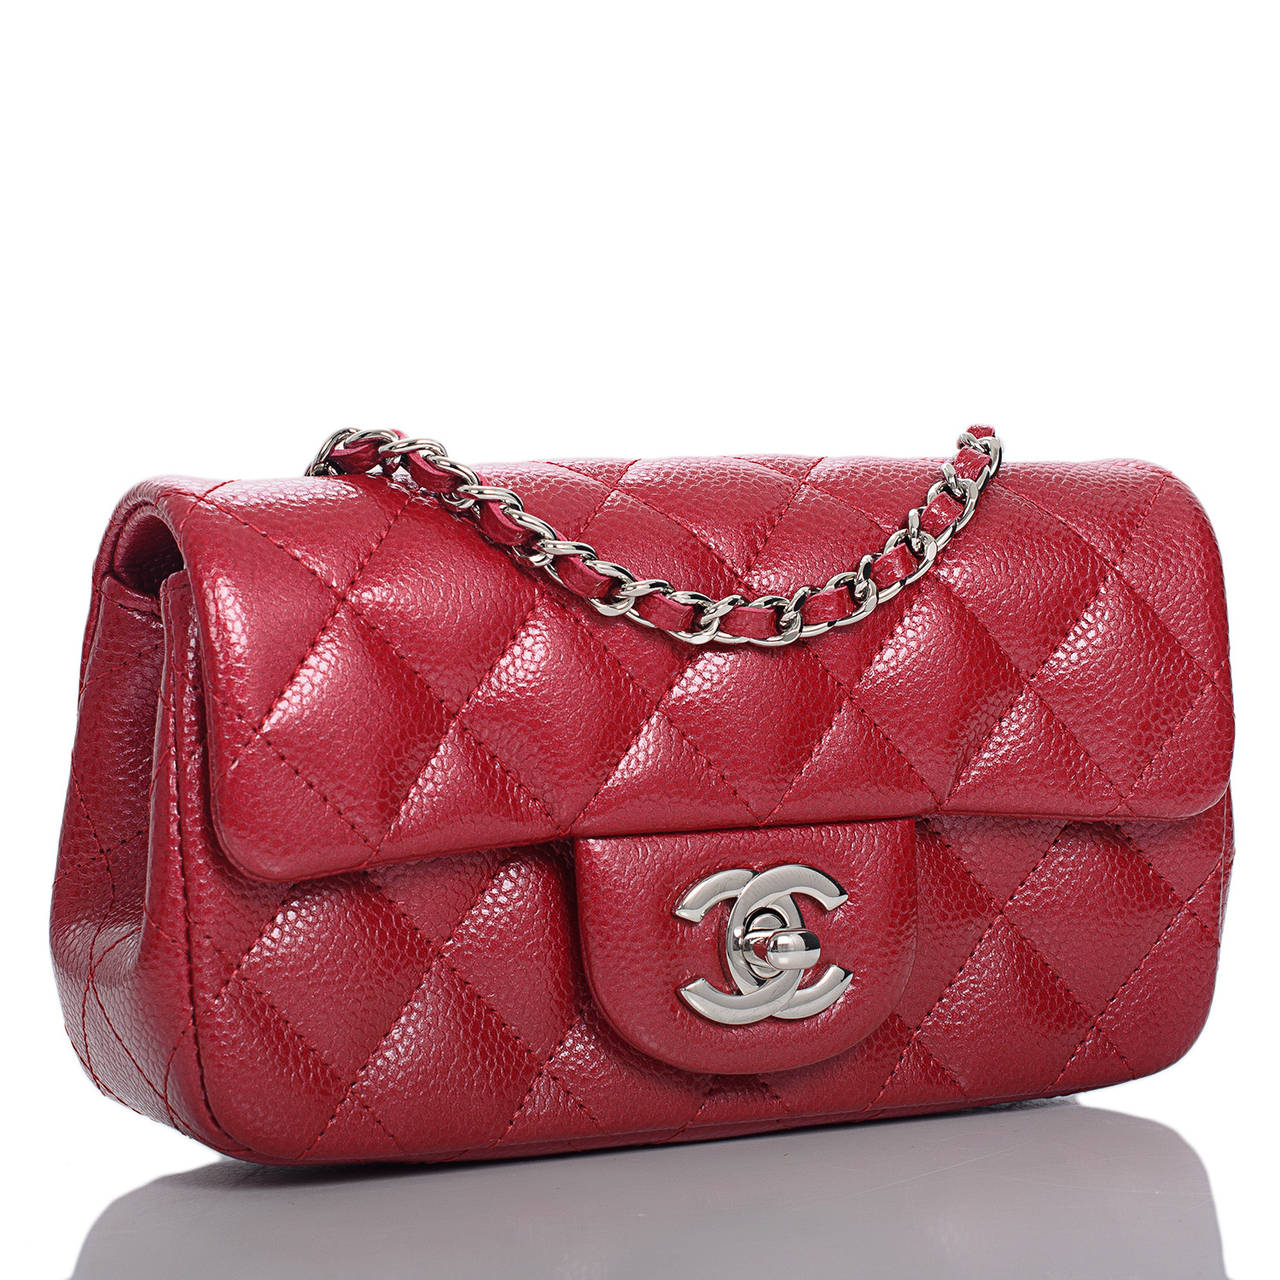 This Mini flap bag is a youthful and compact version of Chanel's signature Classic bags...marrying dark pink glazed caviar leather with silver tone hardware. Worn on the shoulder or across the body, this bag offers a high fashion,hands-free approach